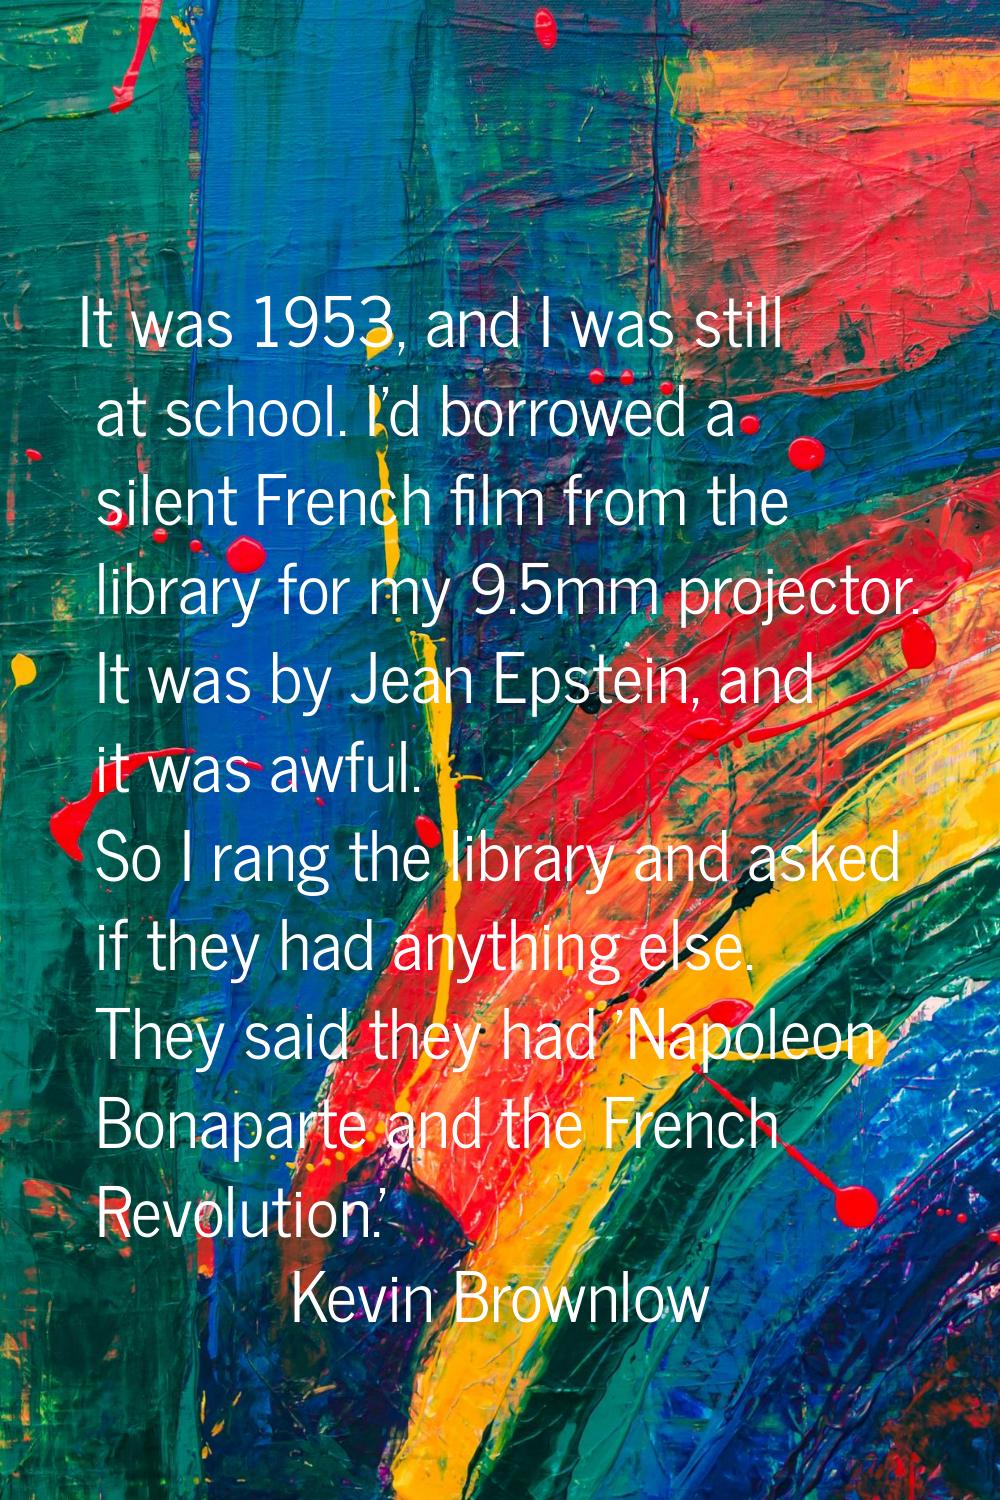 It was 1953, and I was still at school. I'd borrowed a silent French film from the library for my 9